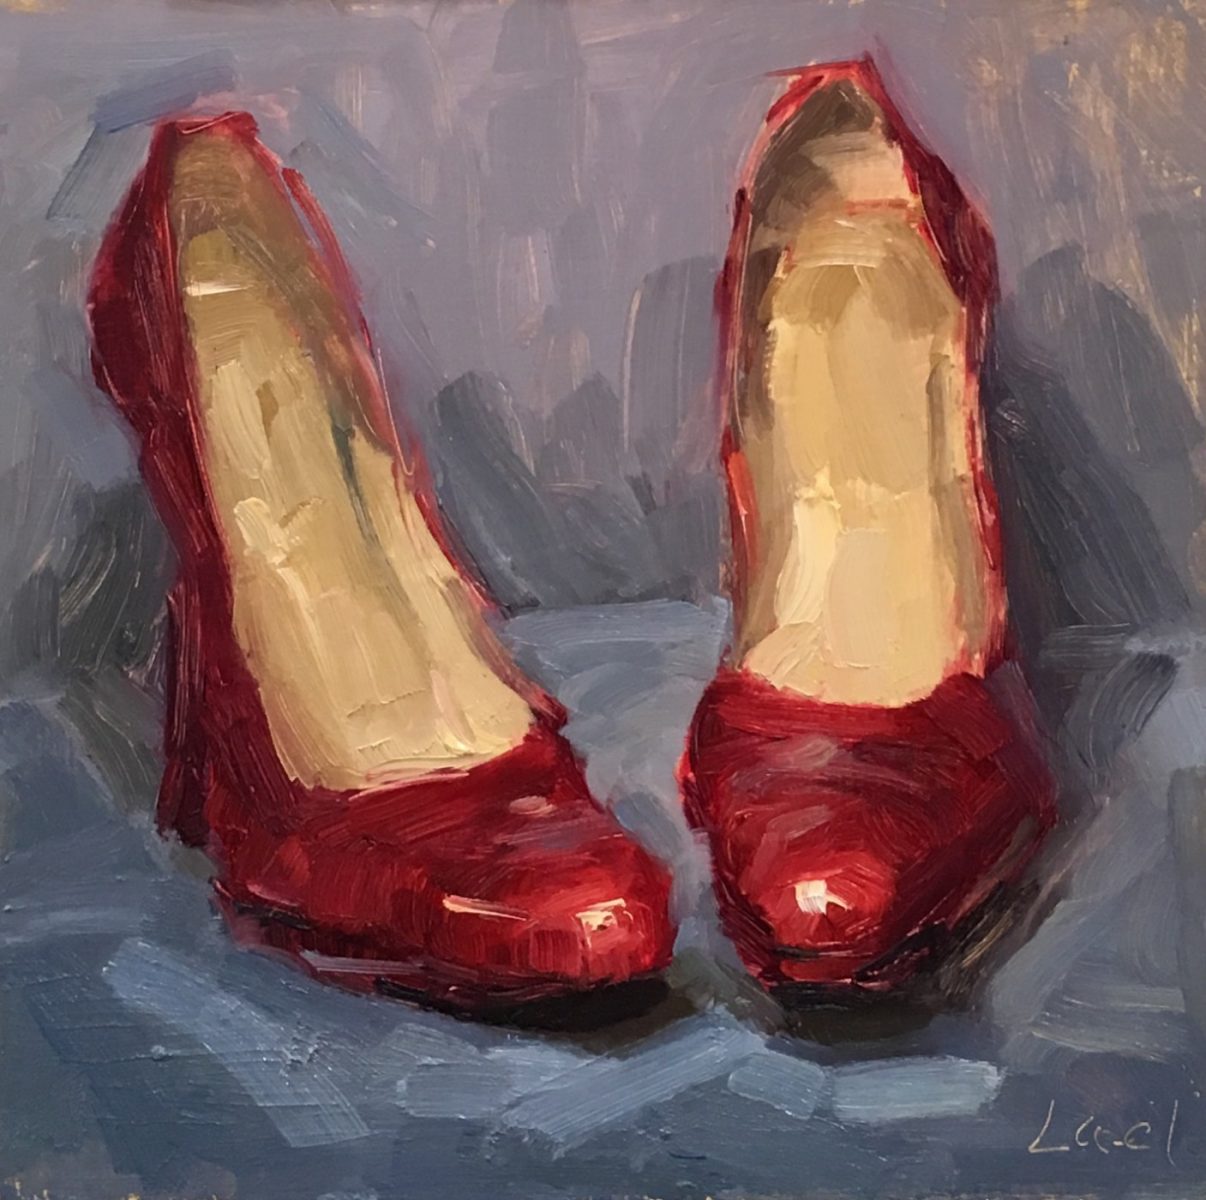 Toe to Toe painting by Lael Weyenberg